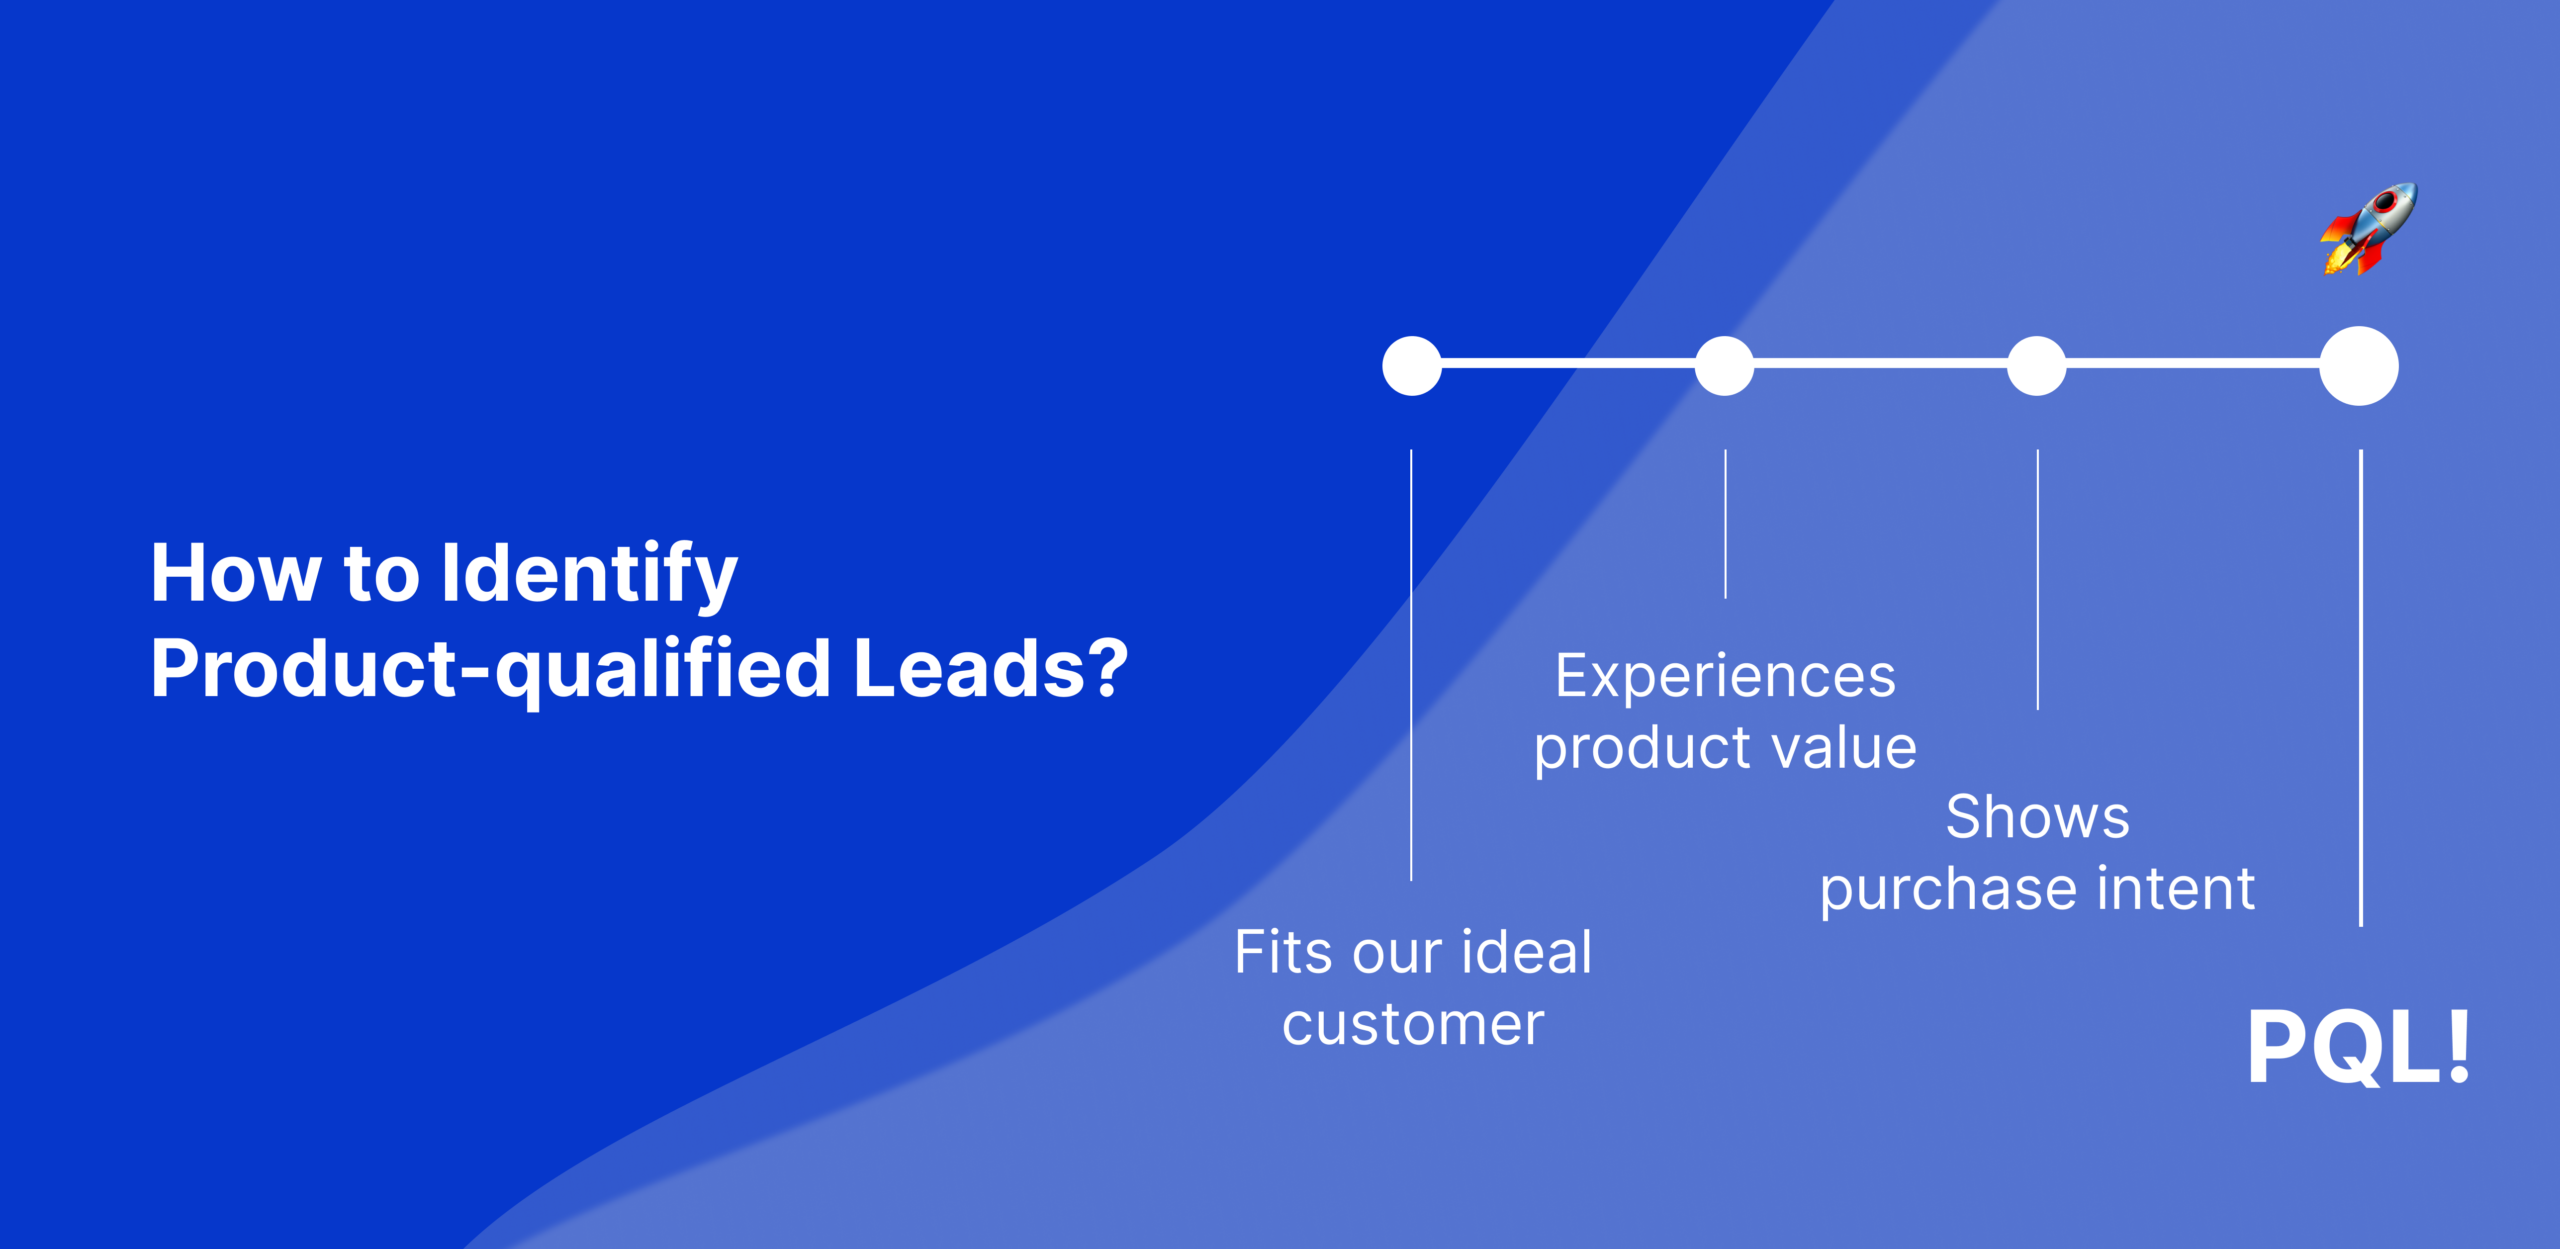 how to identify product-qualified leads